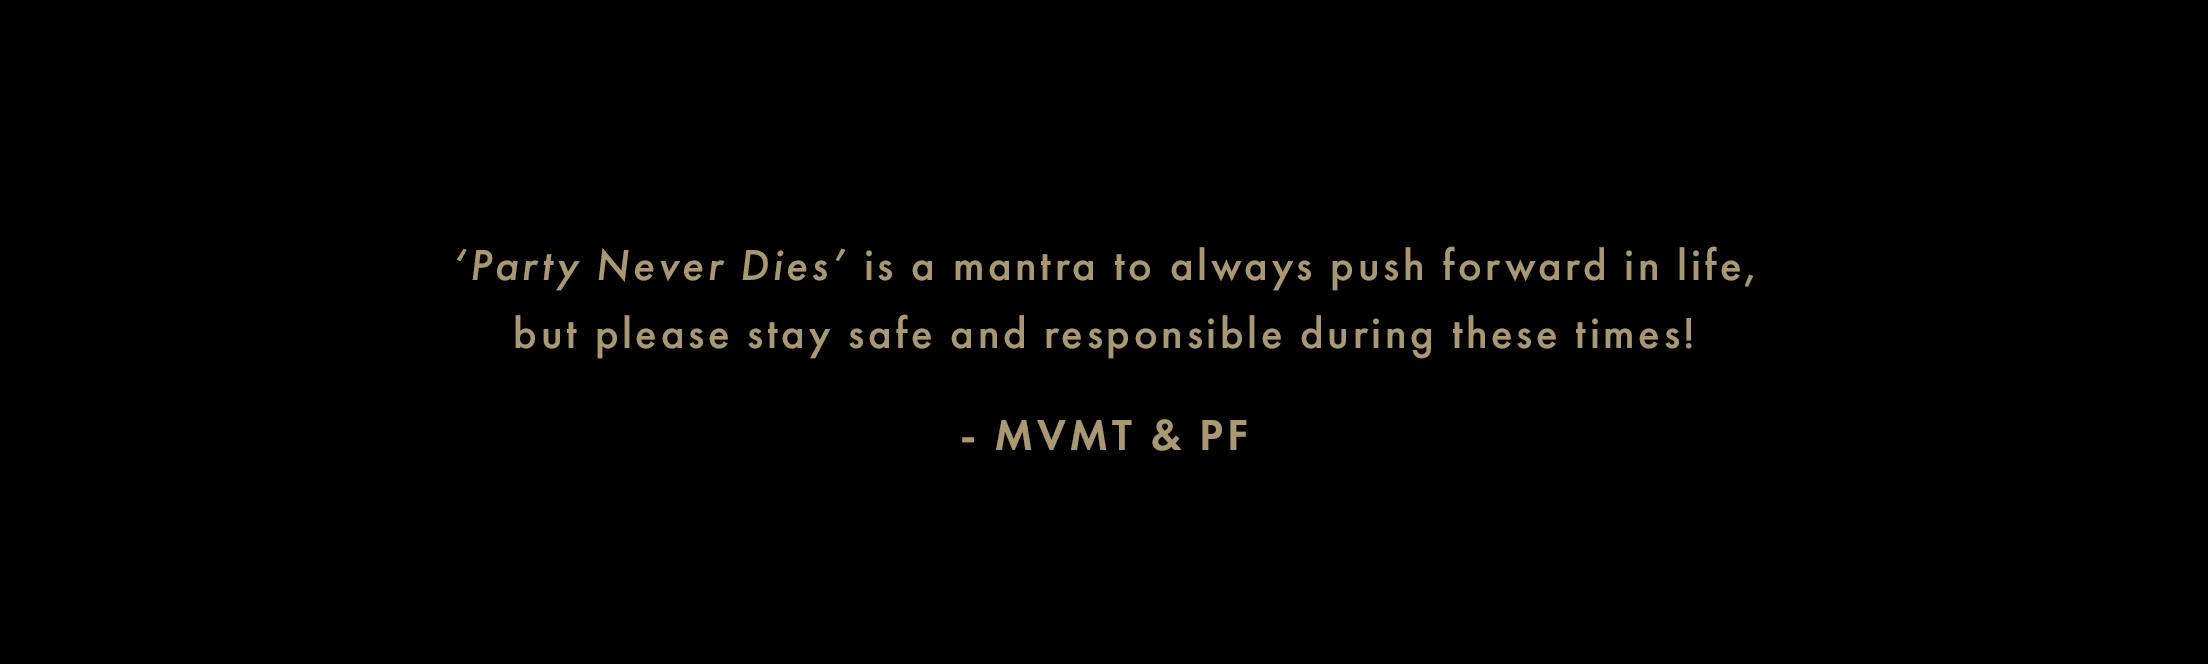 Party Never Dies' is a mantra to always push forward in life, but please stay safe and responsible during these times! -MVMT & PF